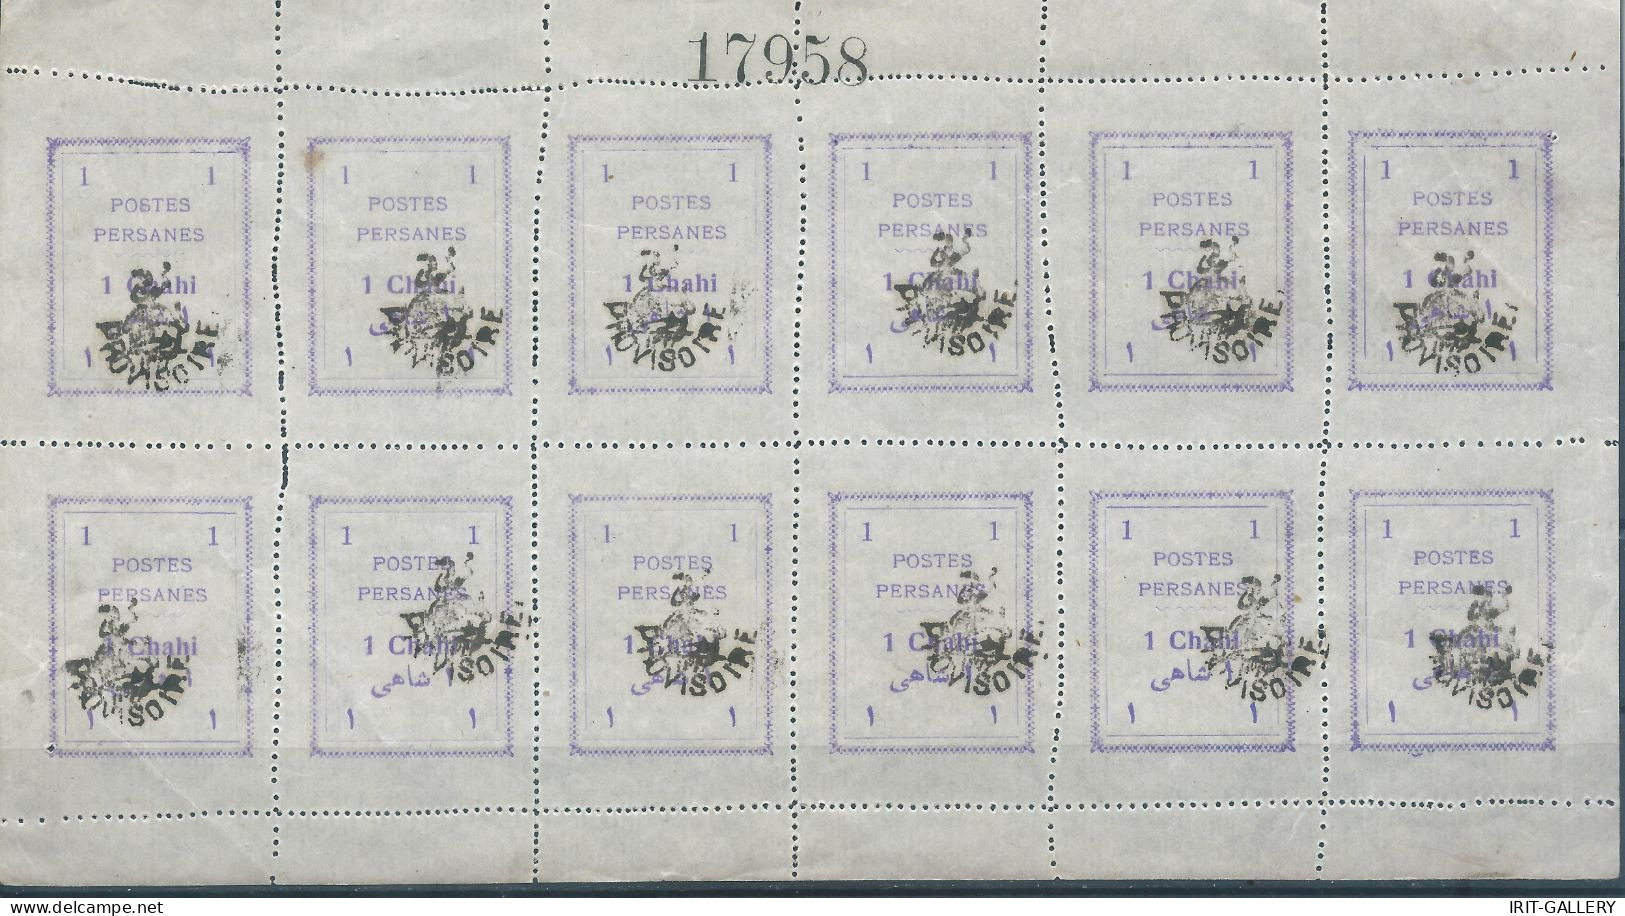 PERSIA PERSE IRAN,1906 The Provisional,Handstamped PROVISOIRE On 1Ch,Type1,Irregular Pin Perforated,mini Sheet Of 12 - Iran